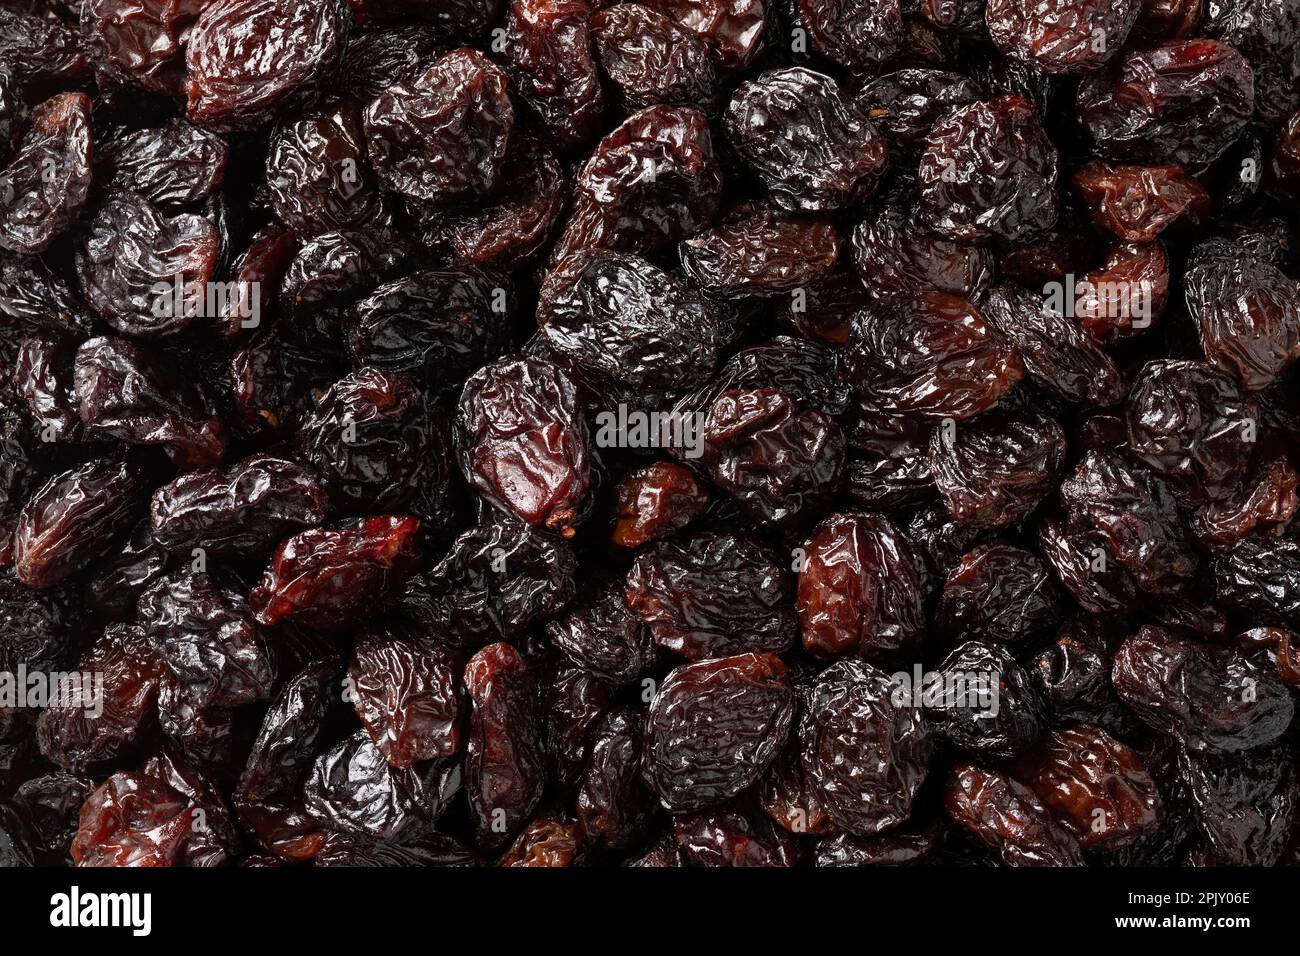 Black flame raisins from Chili full frame close up as background Stock Photo